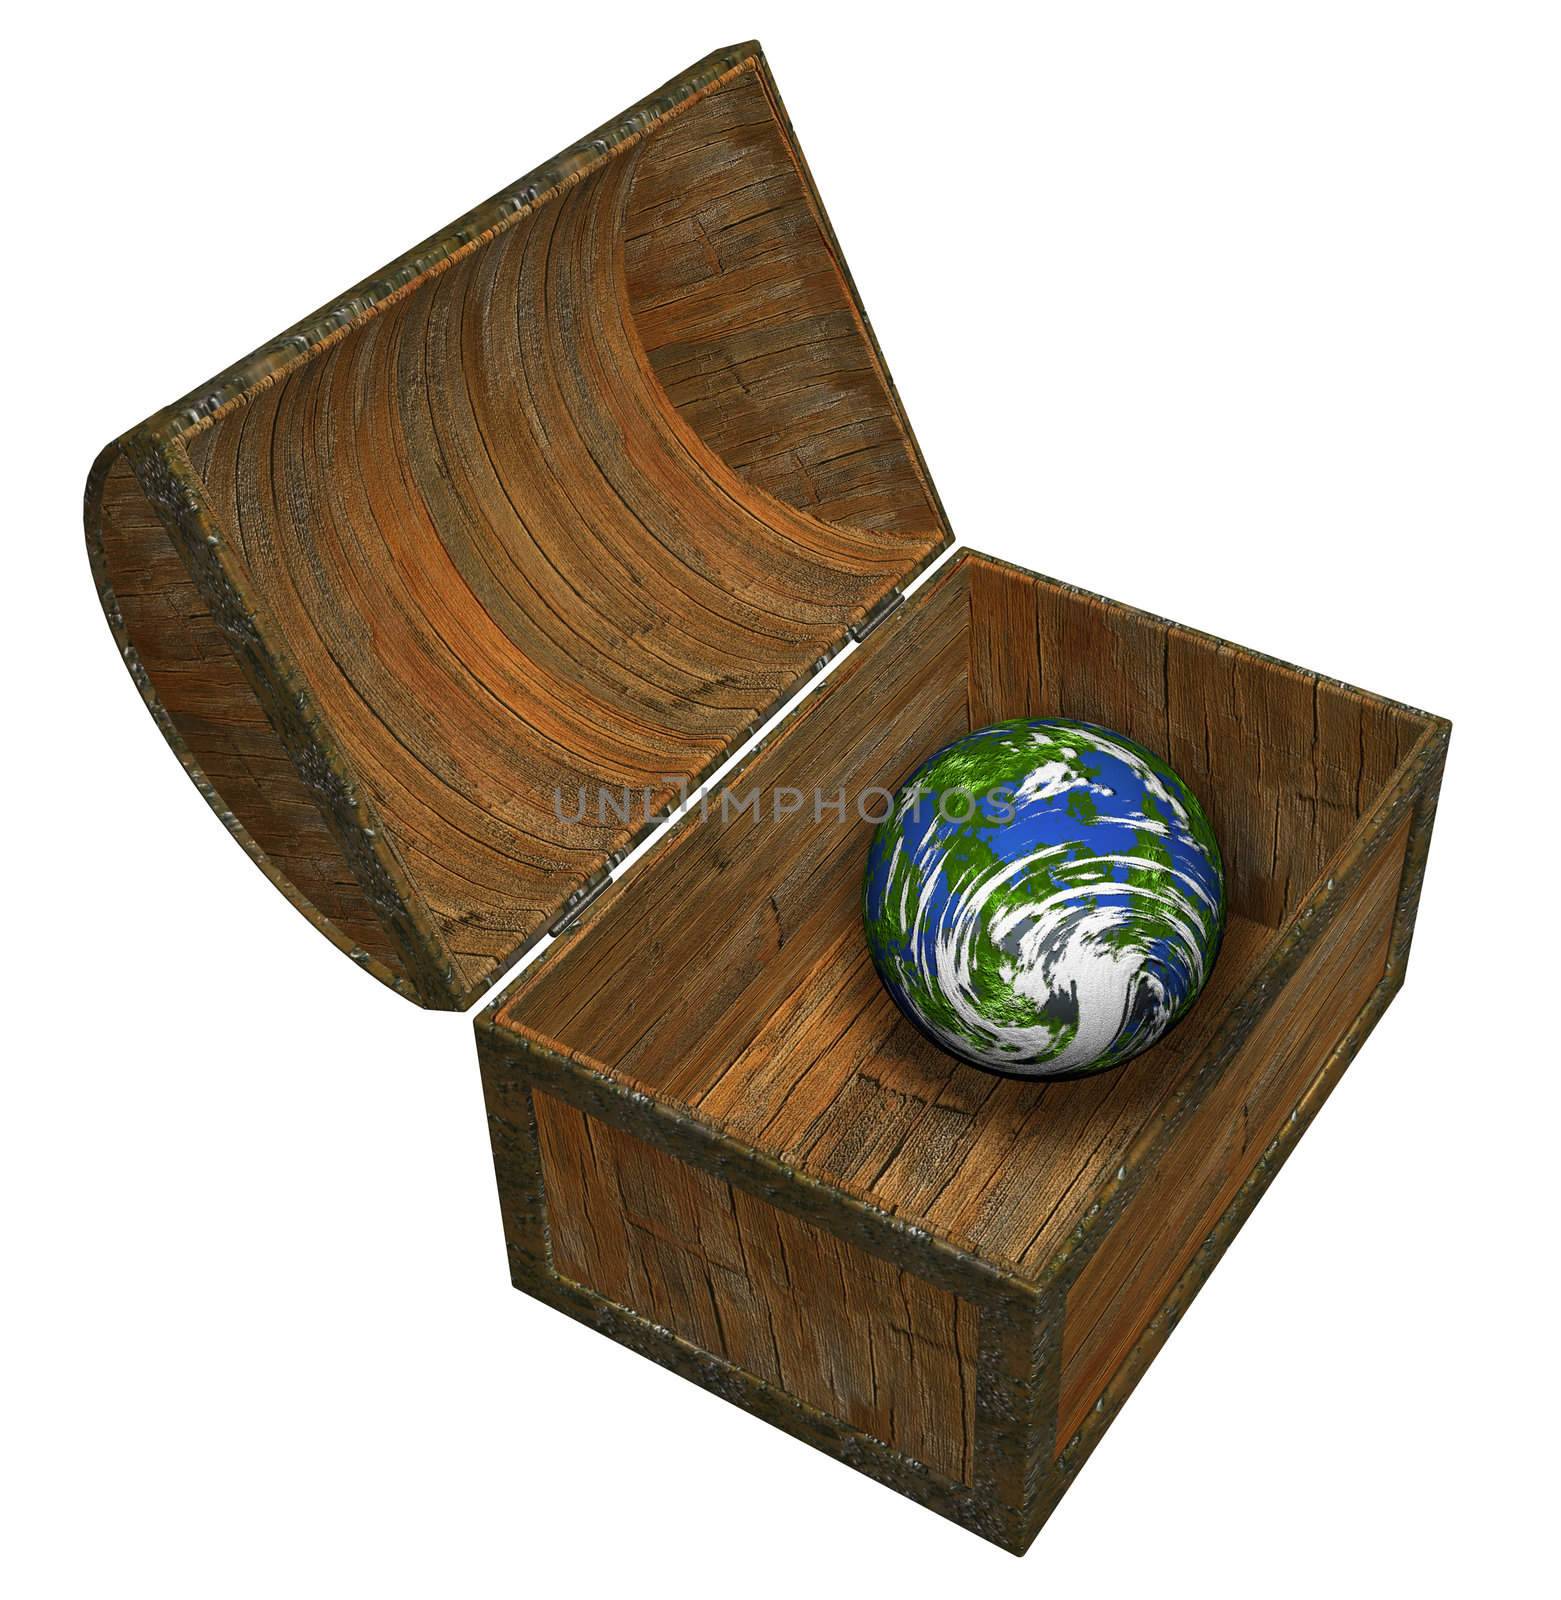 Earth in treasure chest by kjpargeter